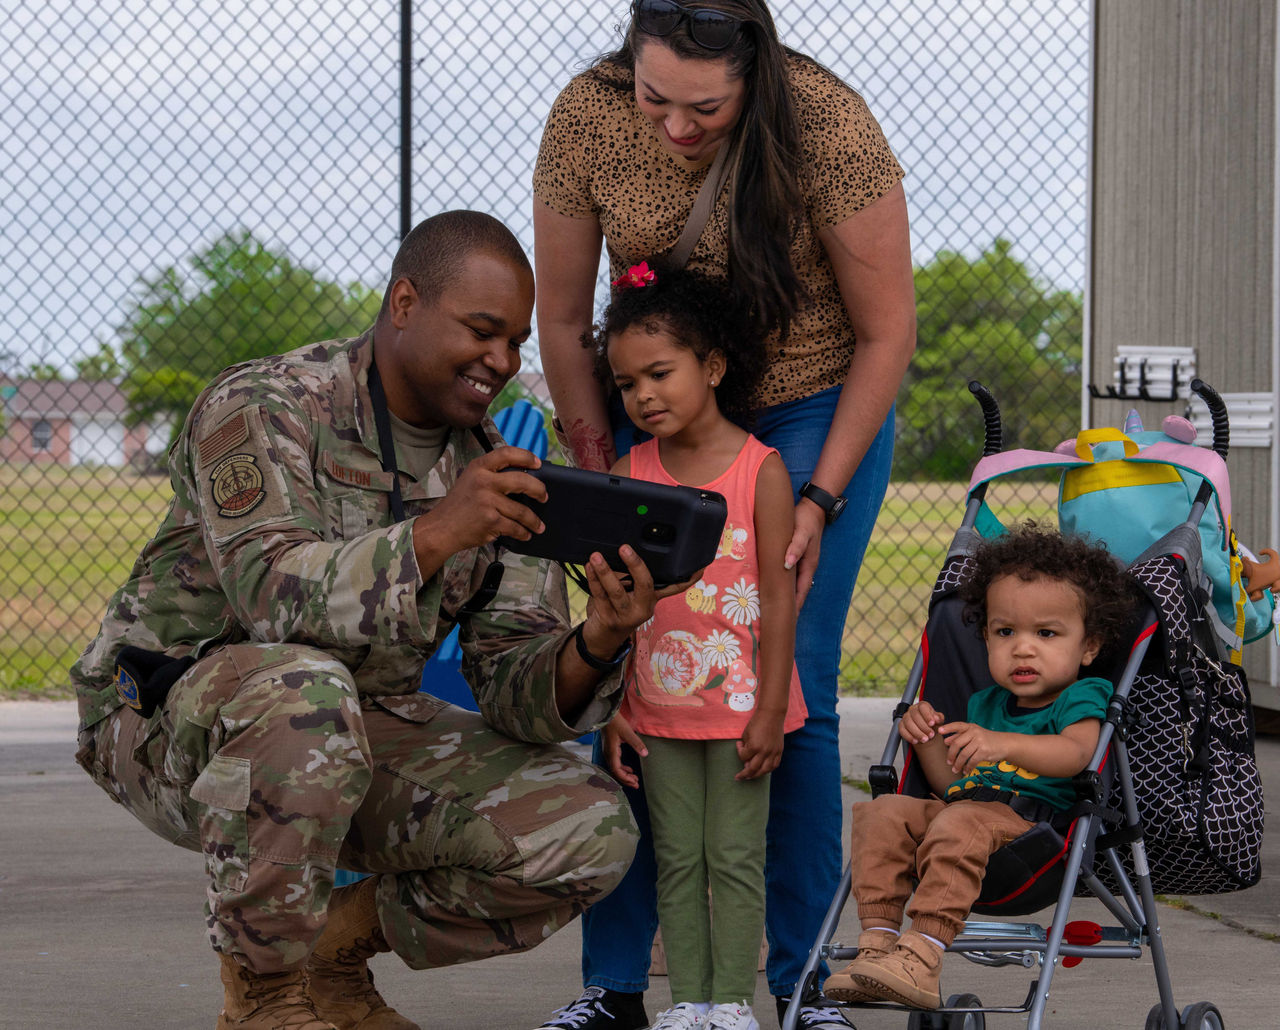 U.S. Air Force Tech. Sgt. Billy Lofton, 325th Security Forces Squadron, noncommissioned officer in charge of plans, shows his family how to operate an unmanned ground vehicle at Tyndall Air Force Base, Florida, April 29, 2022. Lofton’s family participated in the family carnival event celebrating the Month of the Military Child. (U.S. Air Force photo by Airman 1st Class Zachary Nordheim)